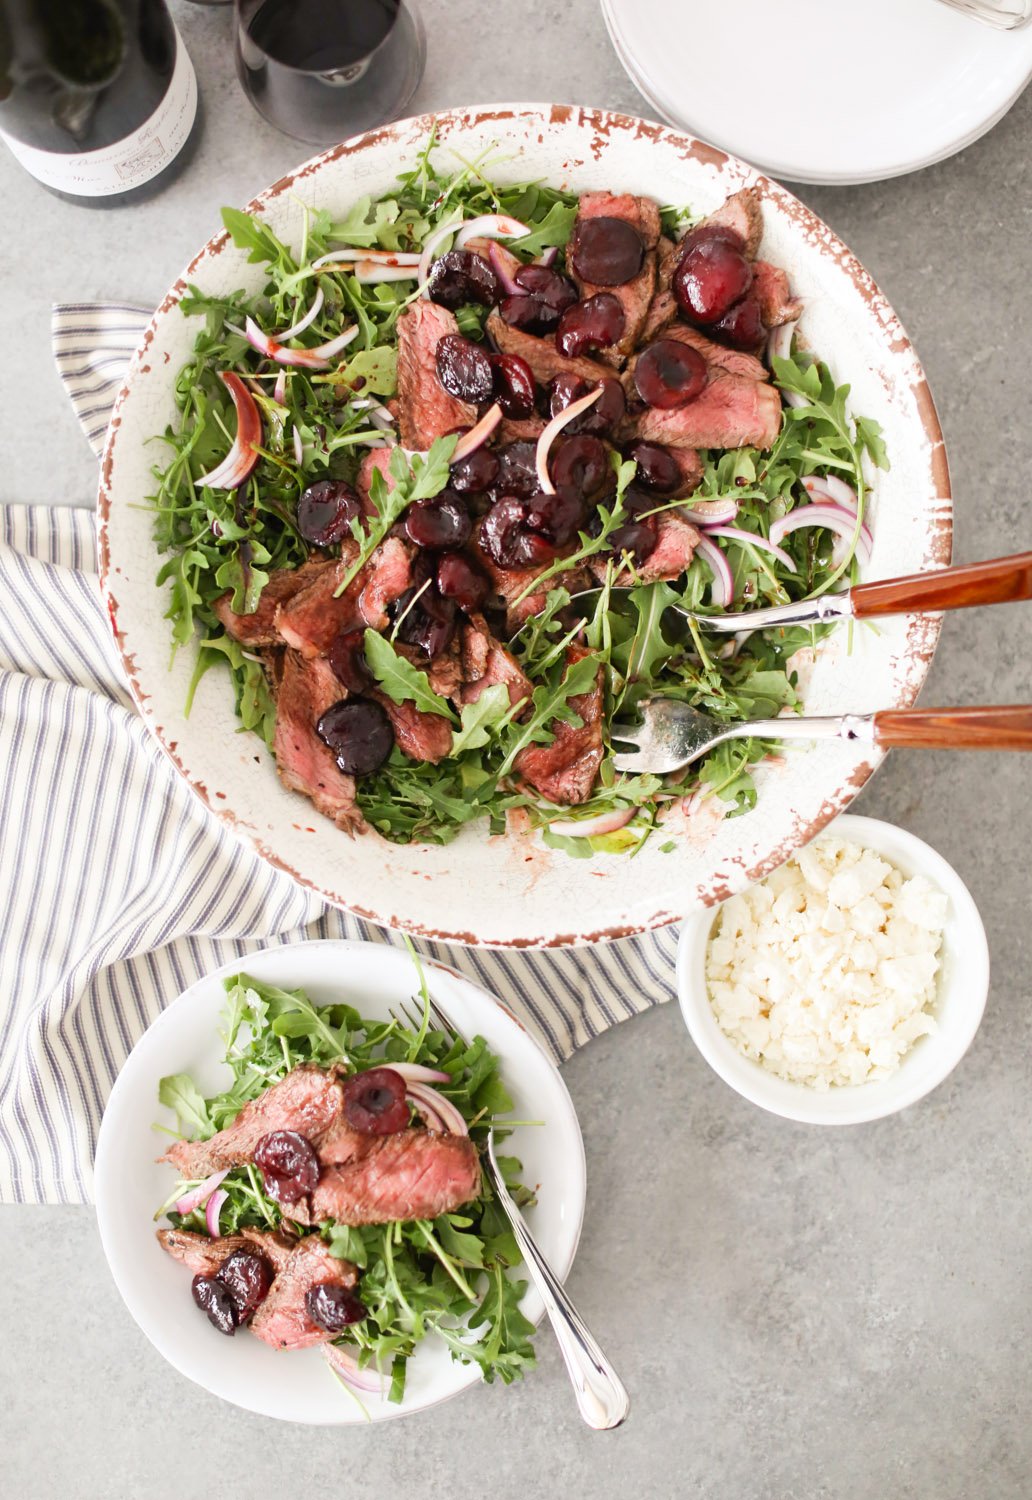 Grilled Steak and Arugula Salad with Balsamic Cherries 